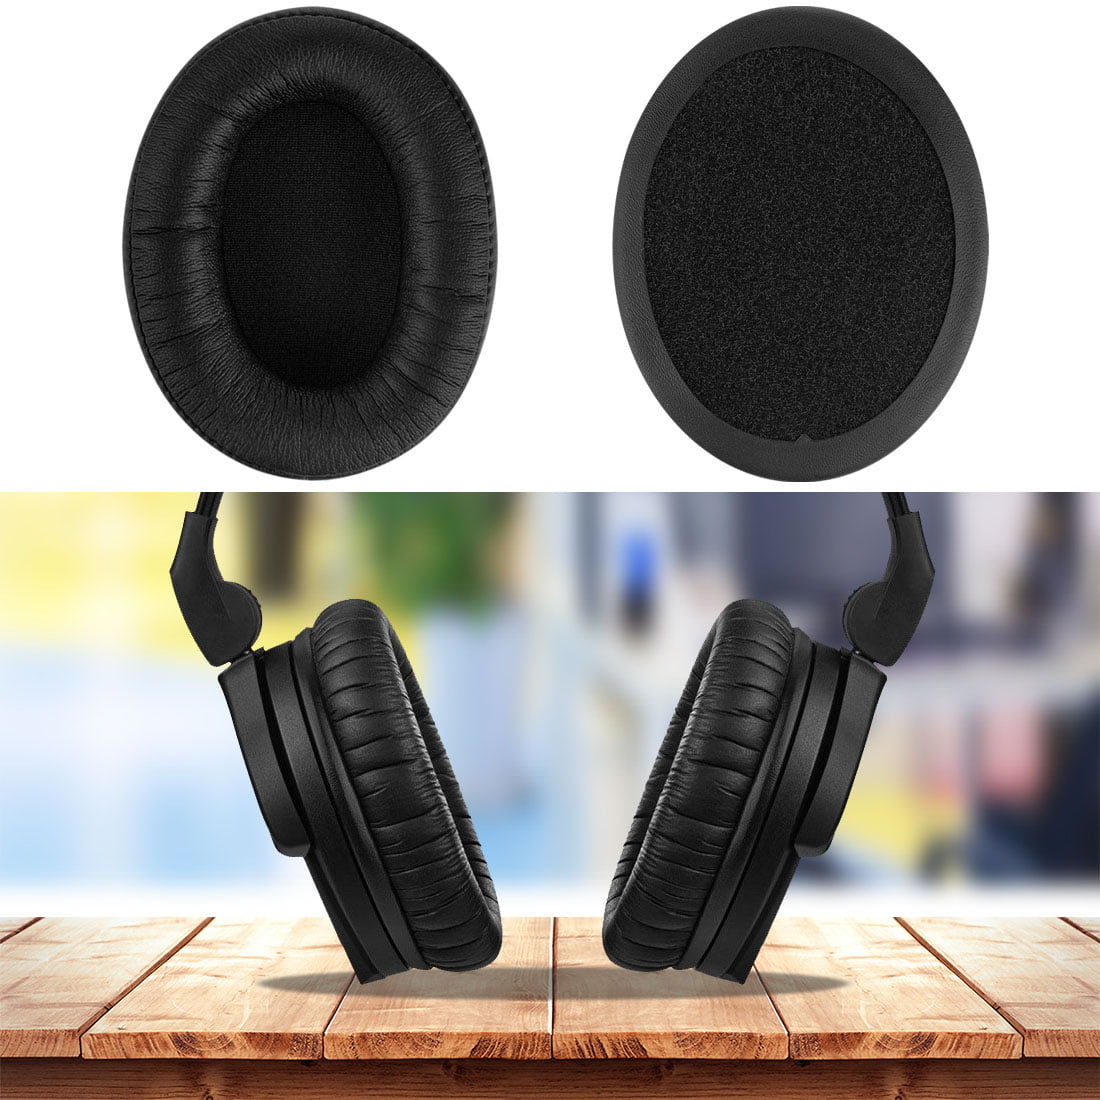 Black Geekria QuickFit Protein Leather Replacement Ear Pads for Sennheiser HD280 HD280-Pro HD281 HMD280 HMD281 Headphones Earpads Headset Ear Cushion Repair Parts 